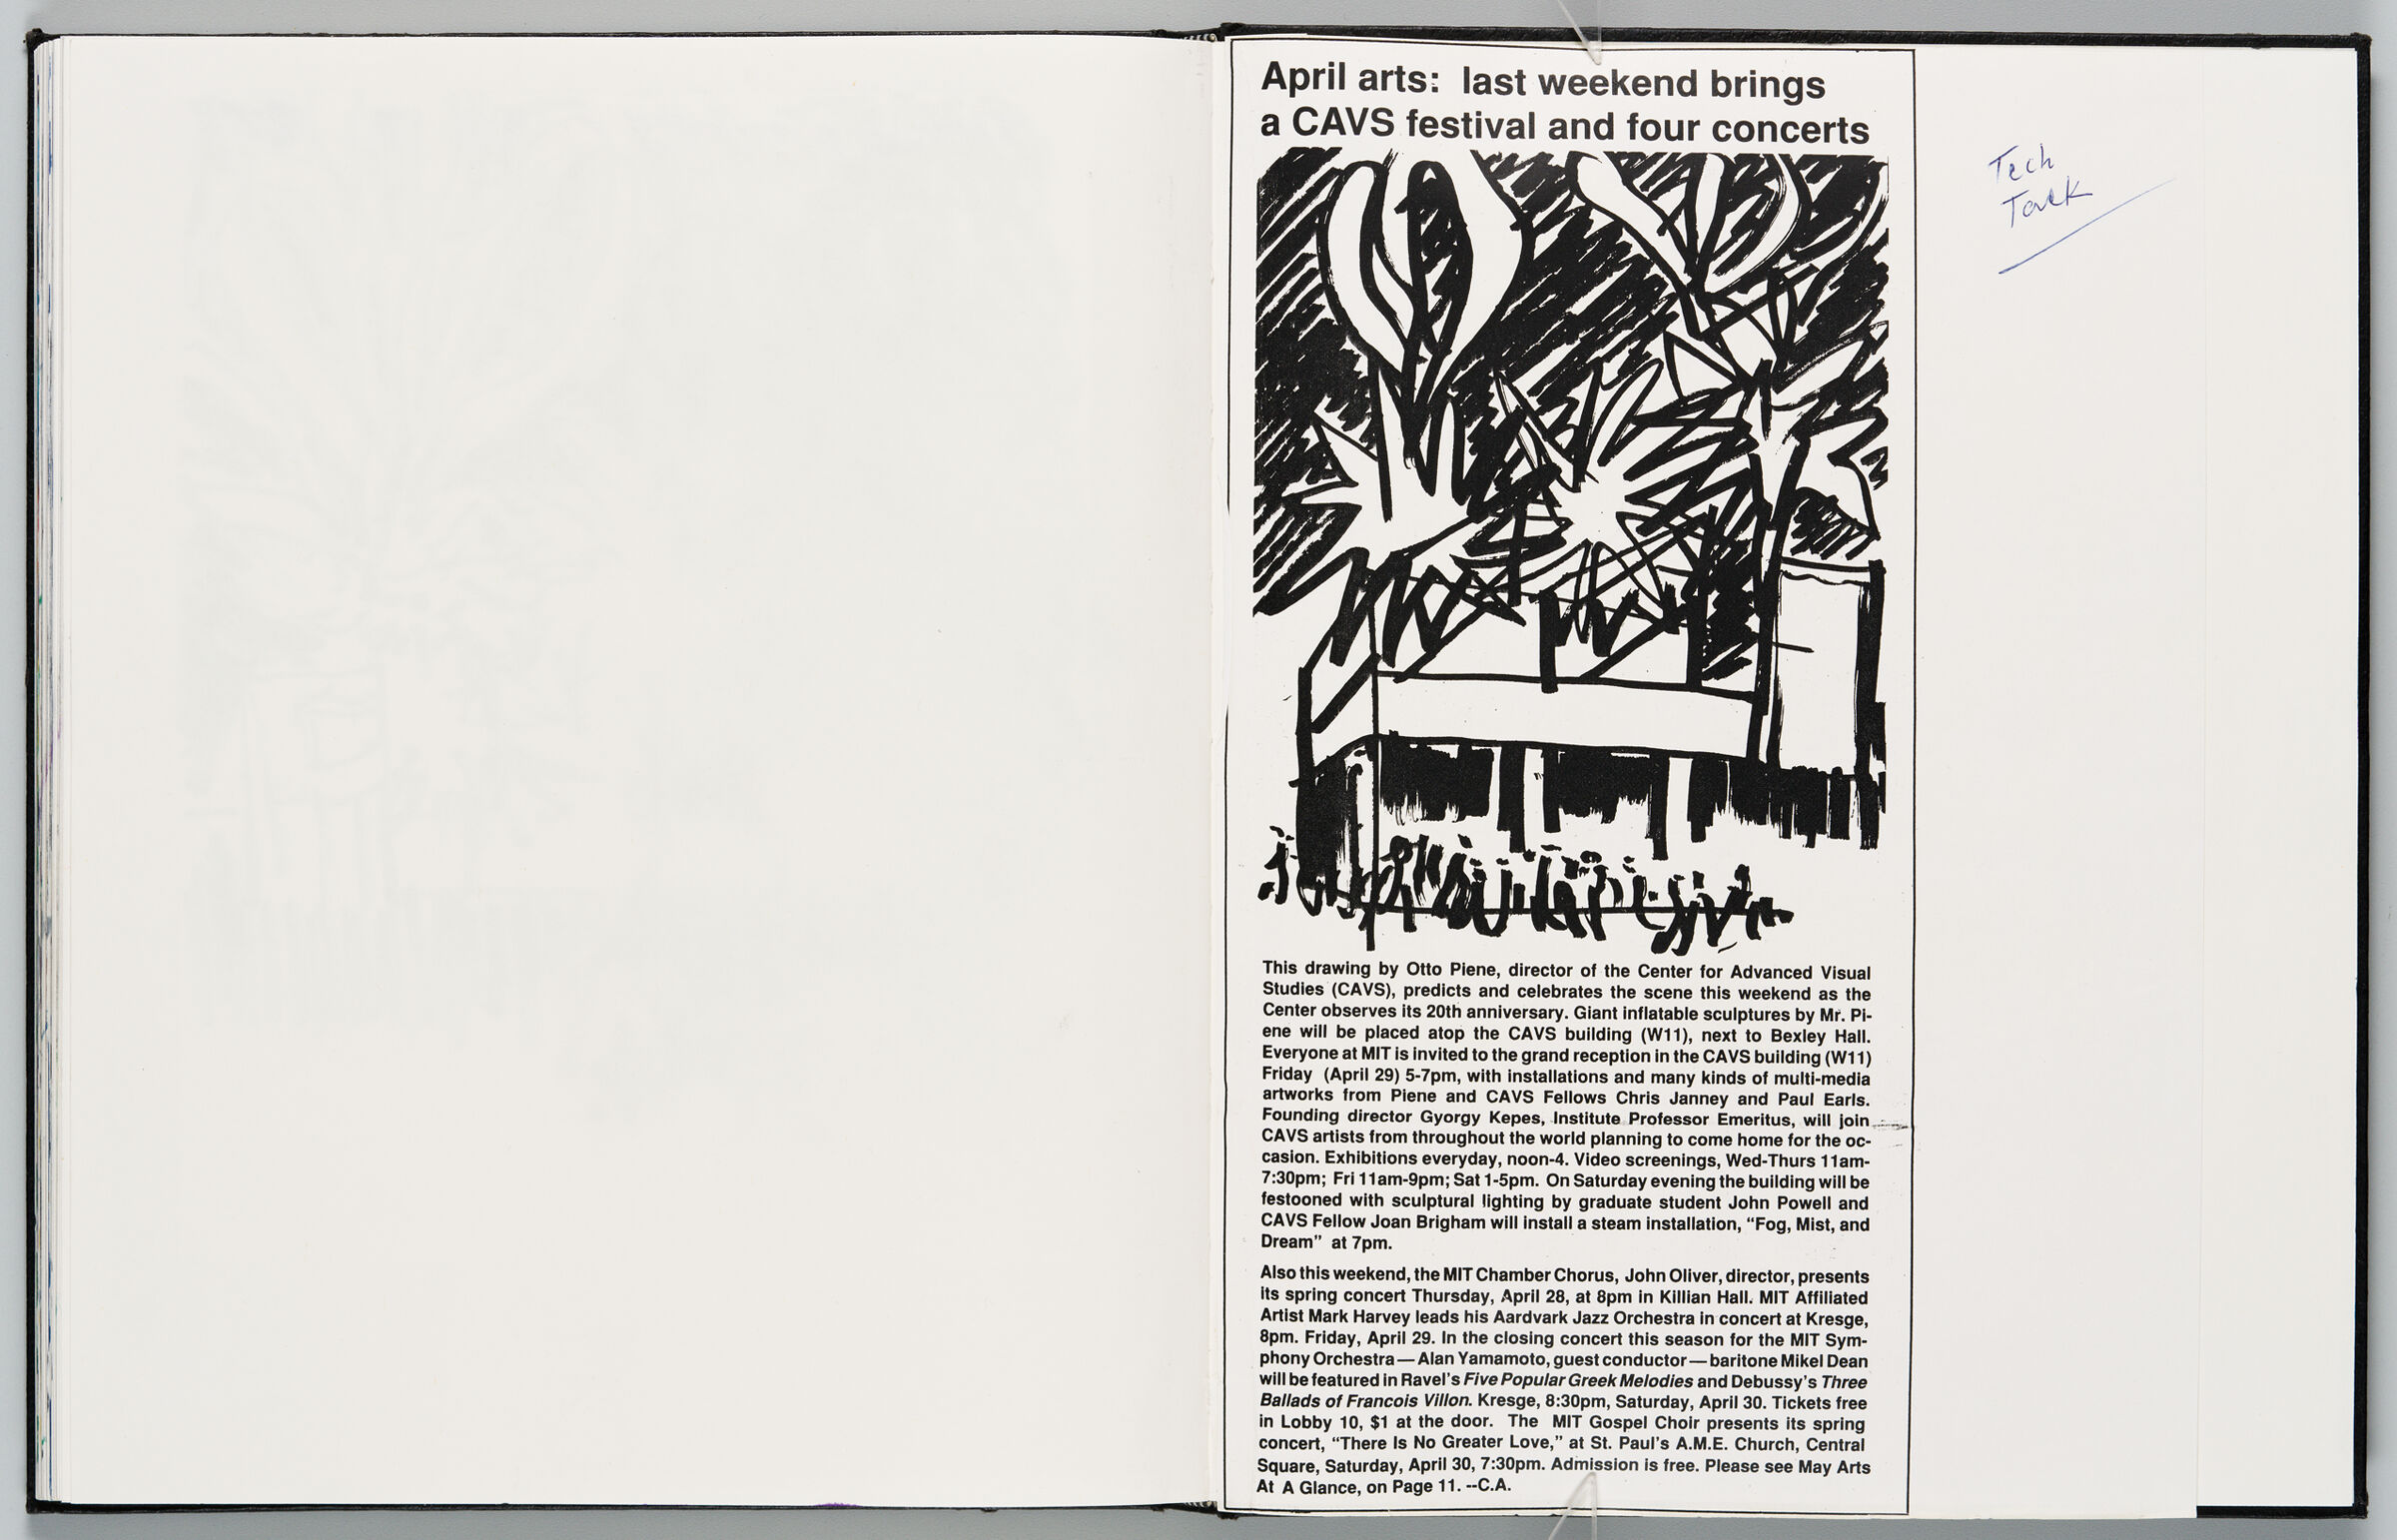 Untitled (Bleed-Through Of Previous Page, Left Page); Untitled (B/W Copy Of Mit Tech Talk Article On Cavs' 20Th Anniversary Celebrations With Piene's Sketch As Illustration, Right Page)